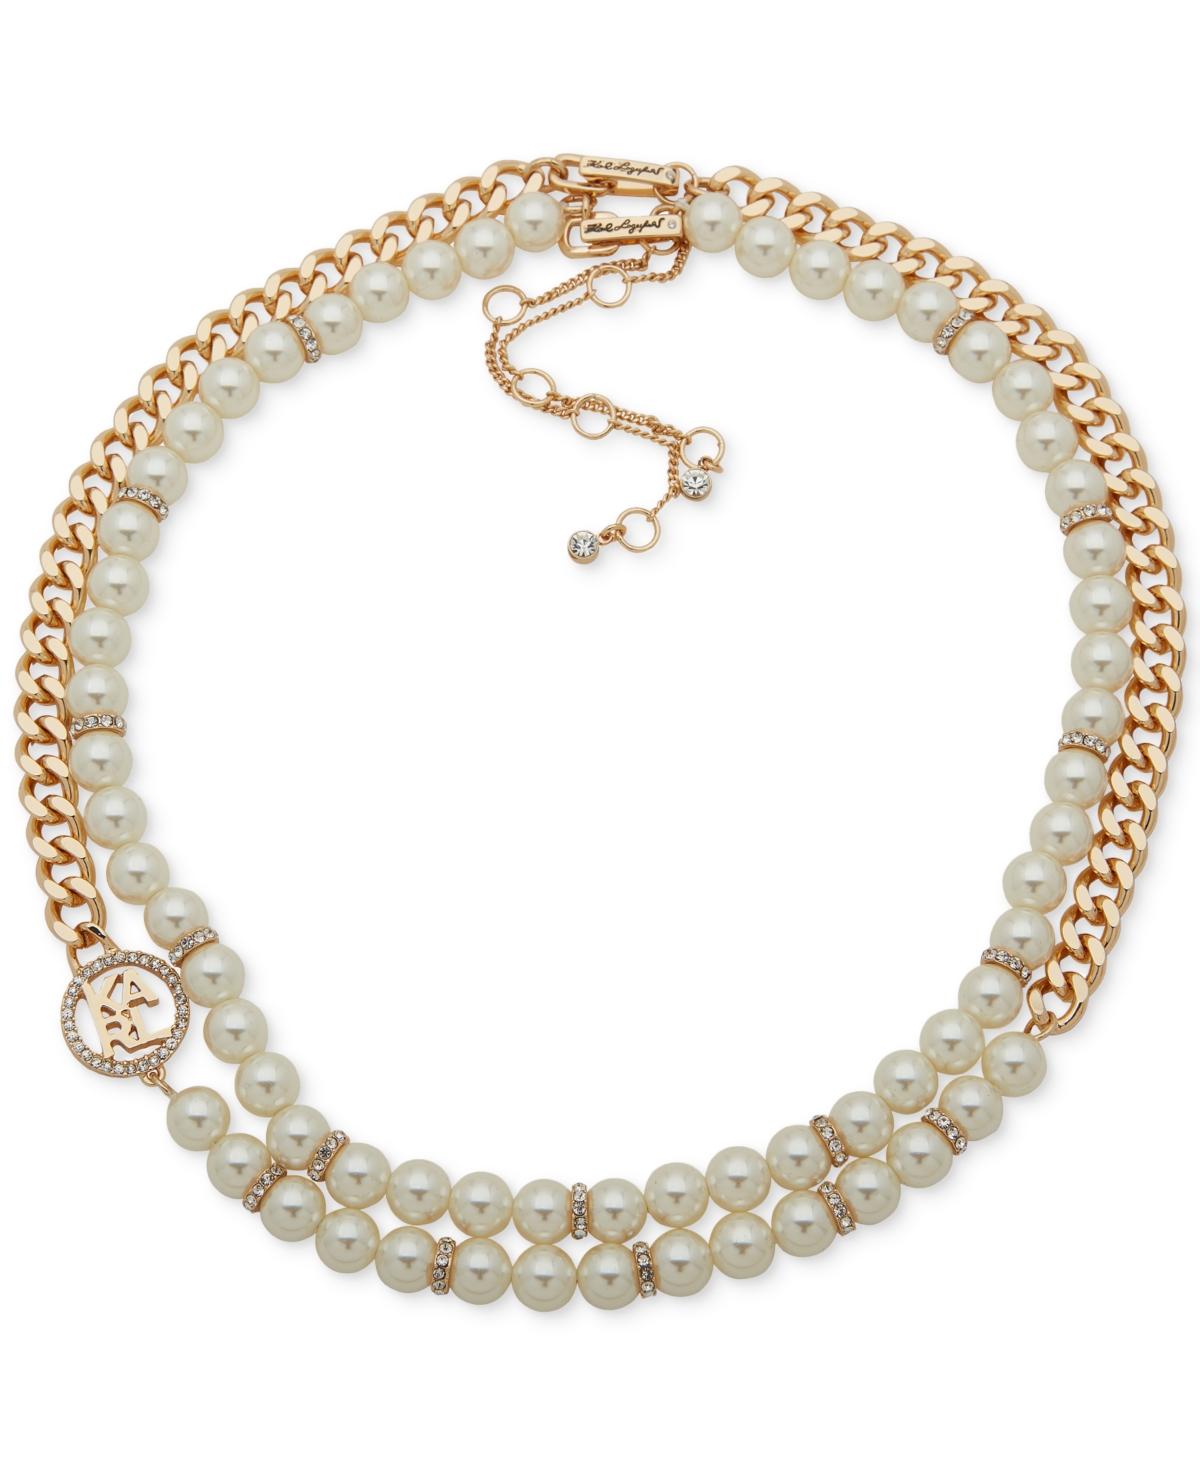 Gold-Tone Imitation Pearl Omega Double Row Necklace, 16" + 3" extender - Pearl